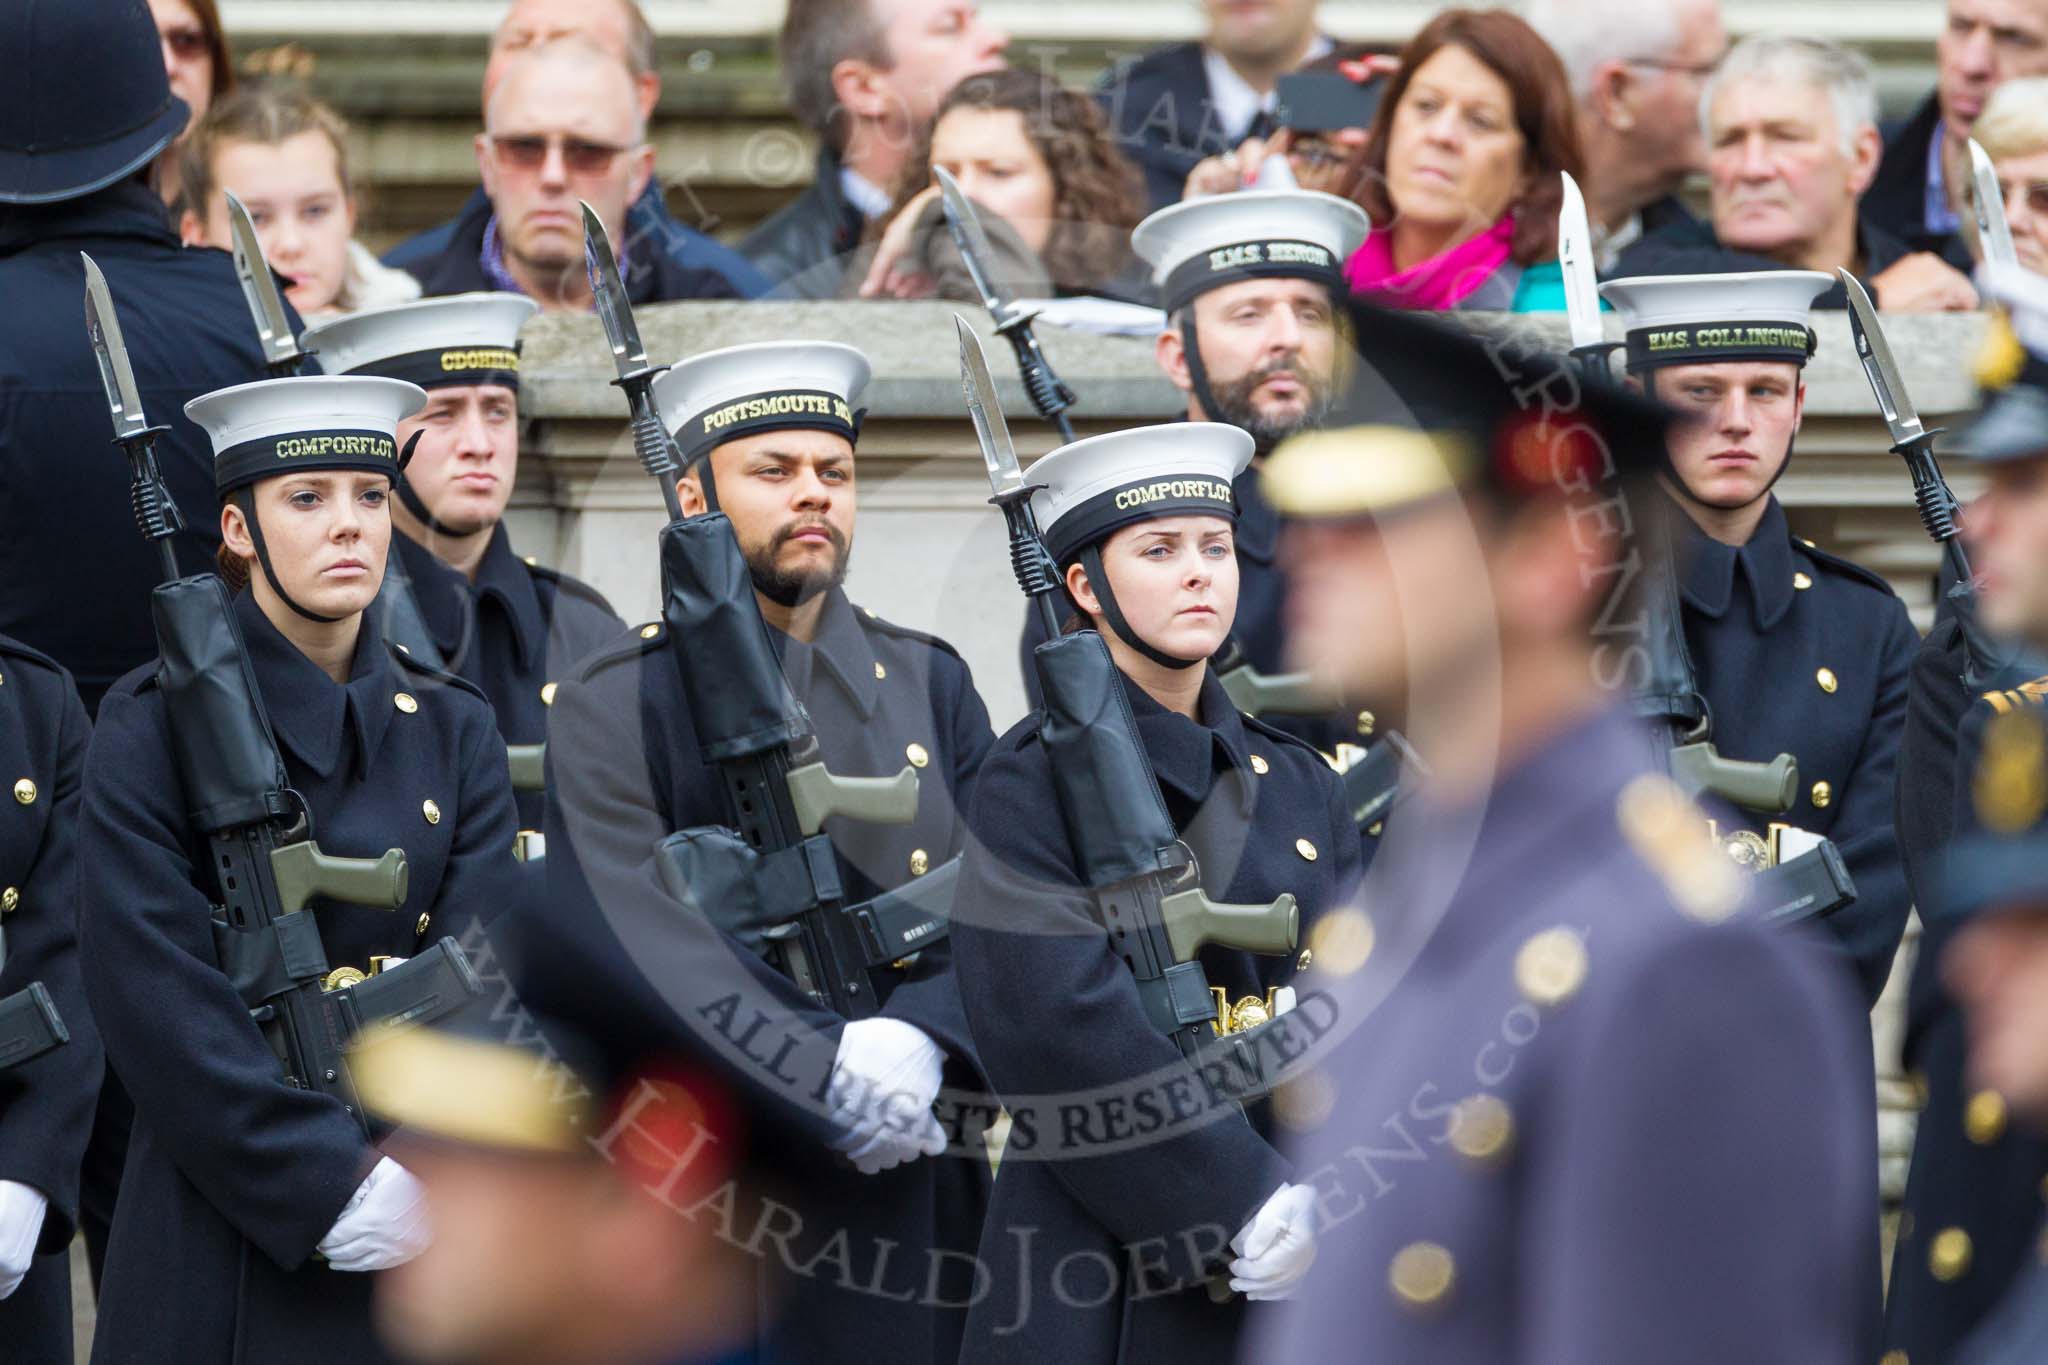 Remembrance Sunday at the Cenotaph 2015: A part of the Royal Navy detachment, here from the Commander Portsmouth Flotilla (COMPORFLOT). Image #265, 08 November 2015 11:12 Whitehall, London, UK